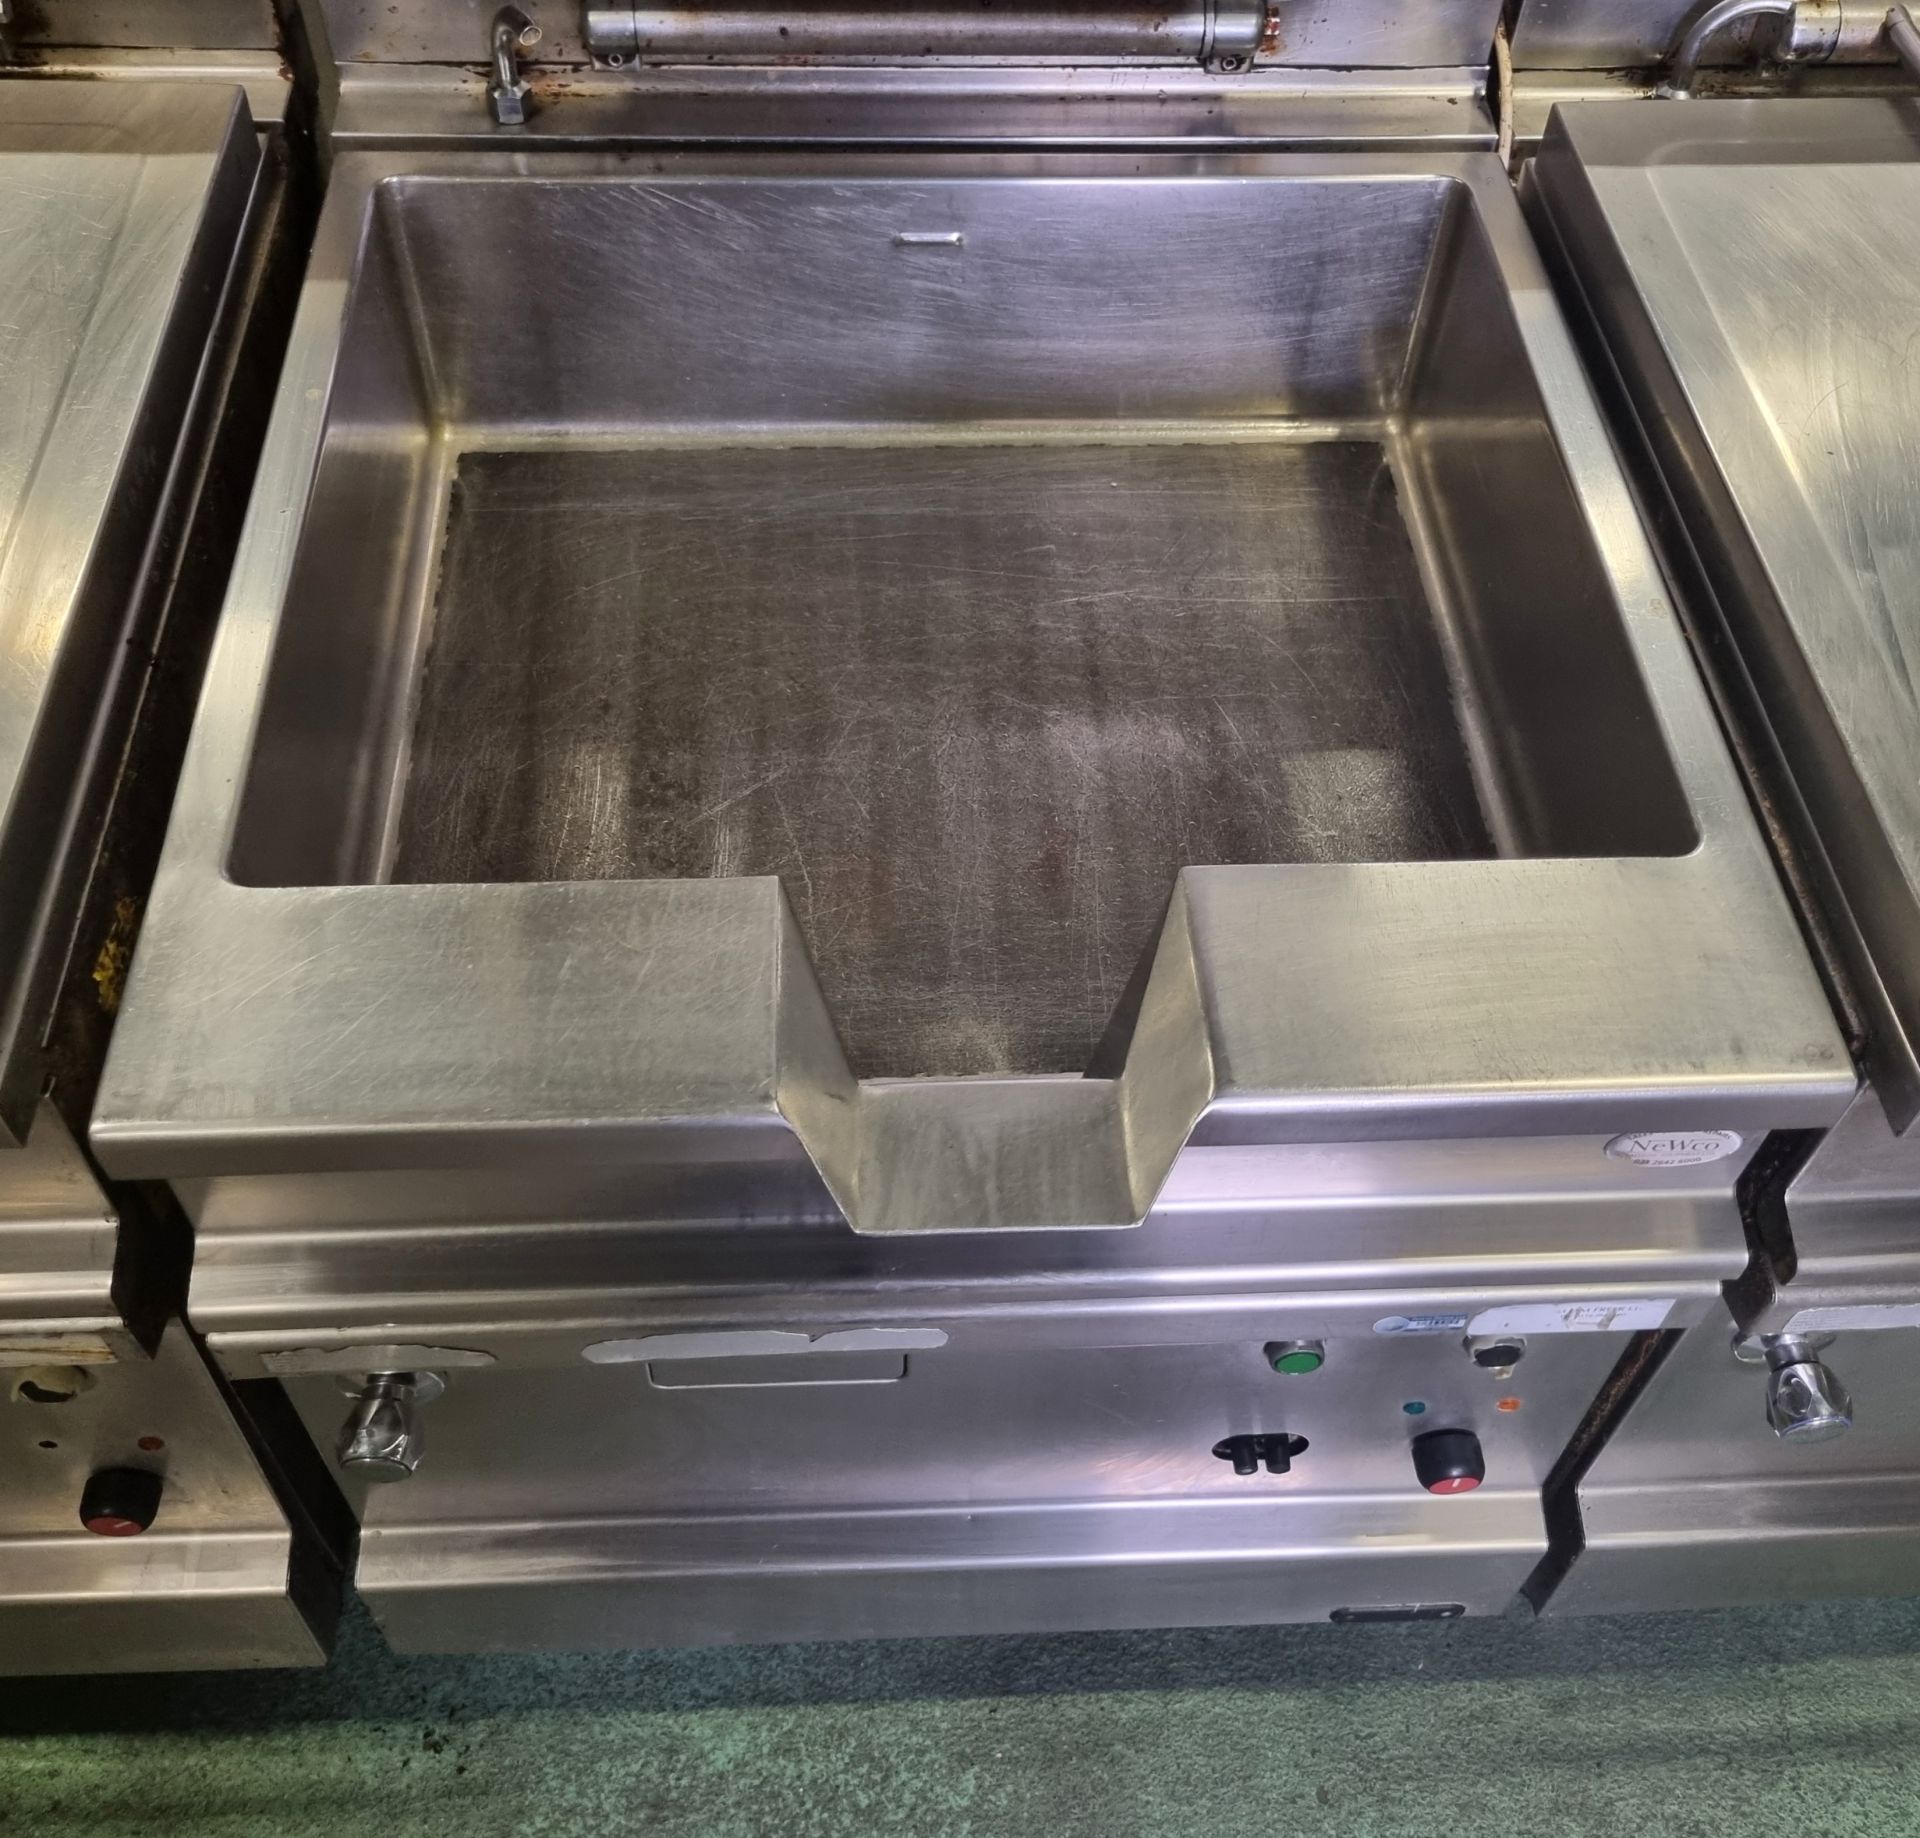 Angelo Po 71RA stainless steel electric bratt pan - W 900 x D 1000 x H 1100mm - Image 3 of 4